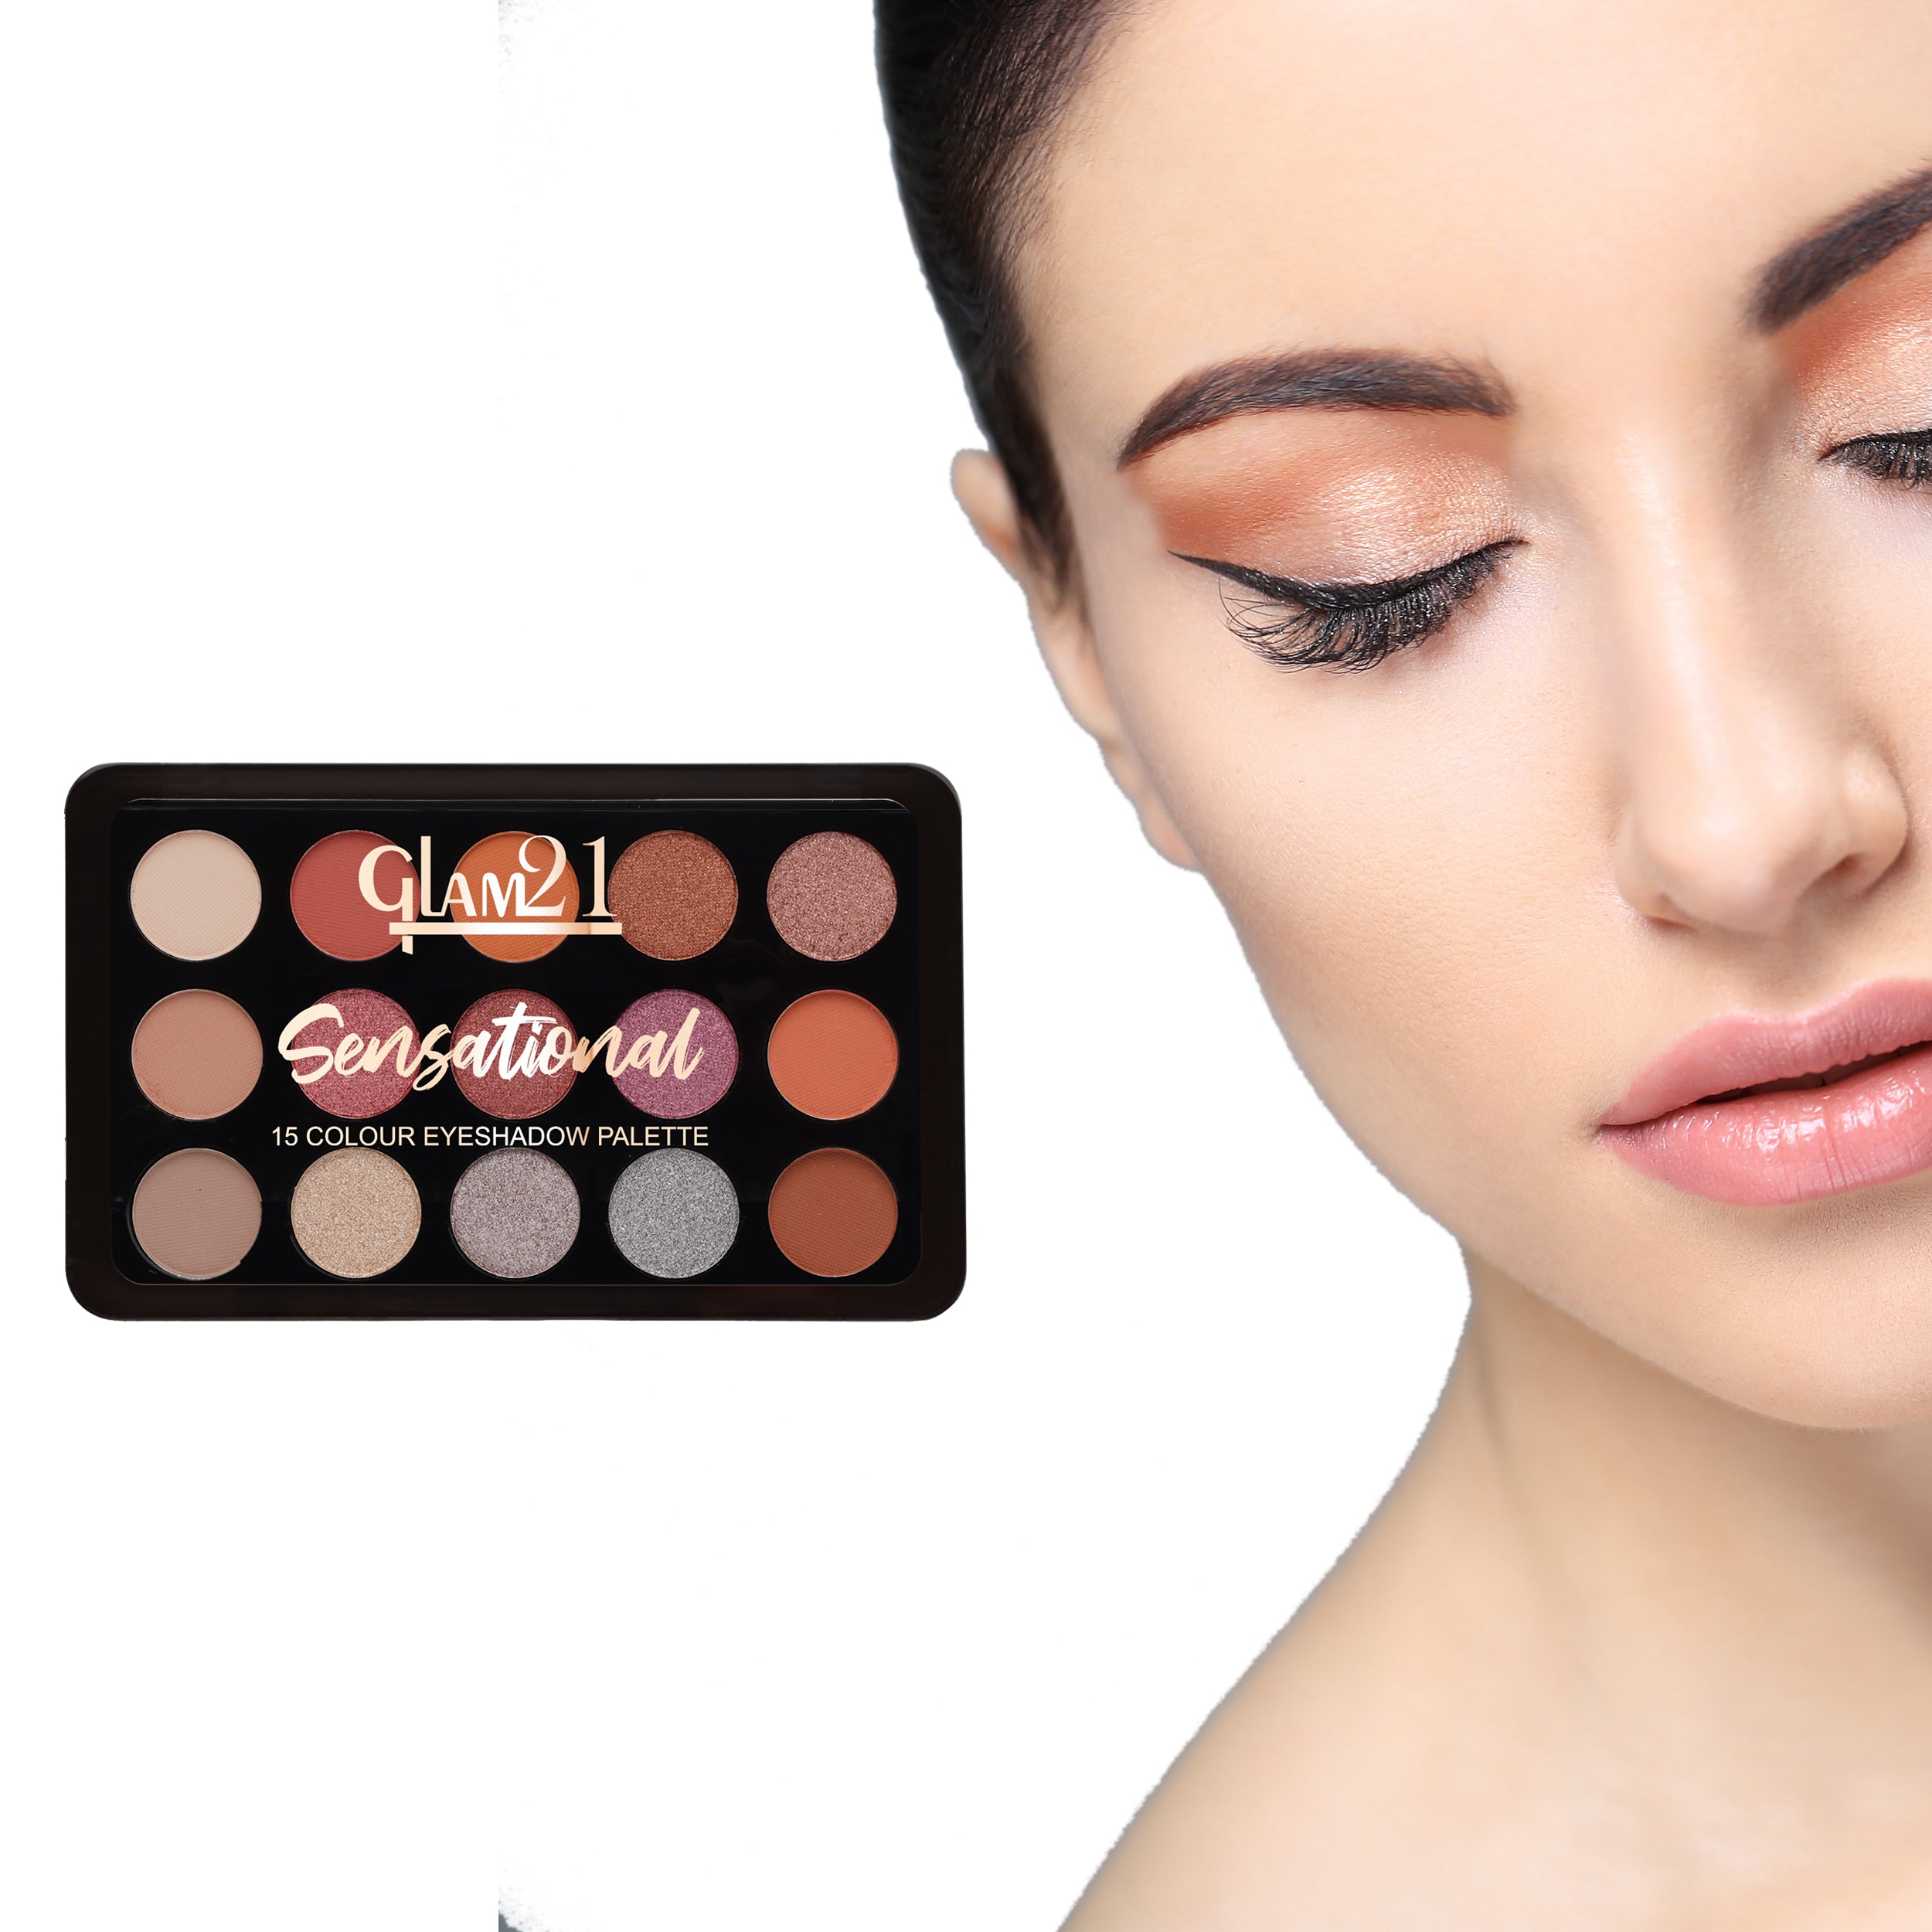 Glam21 Sensational 15 Colour Eyeshadow Palette-Unique Combination of Mattes & Shimmers 14 g (Shade-03)